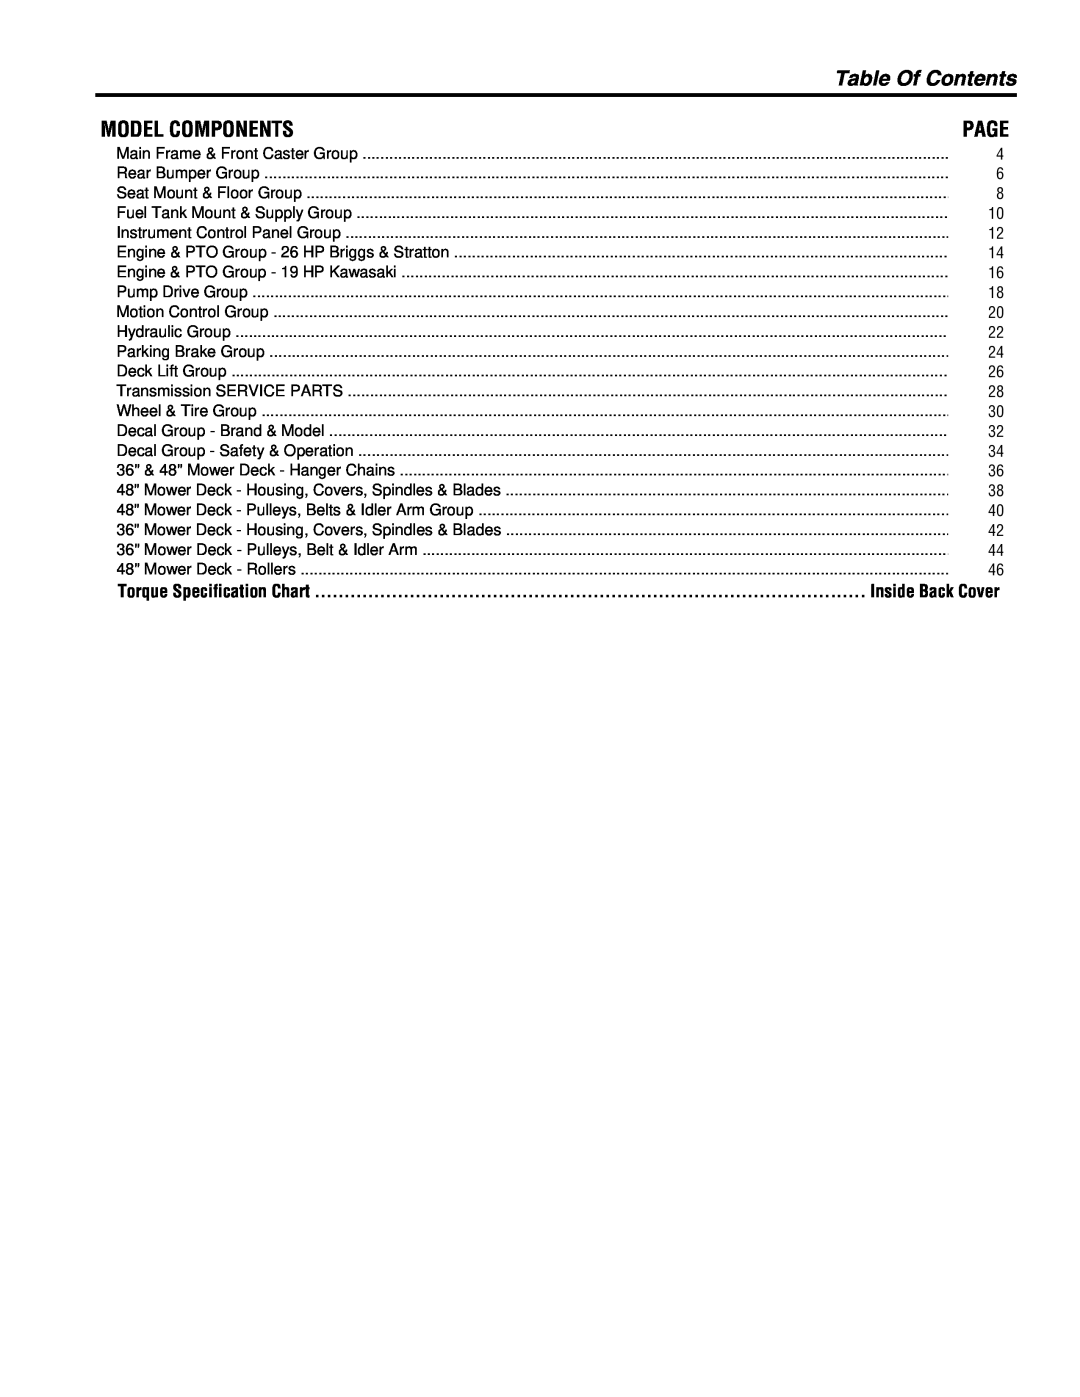 Briggs & Stratton 5900734, 5900709, 5900683 manual Table Of Contents, Model Components, Page, Torque Specification Chart 